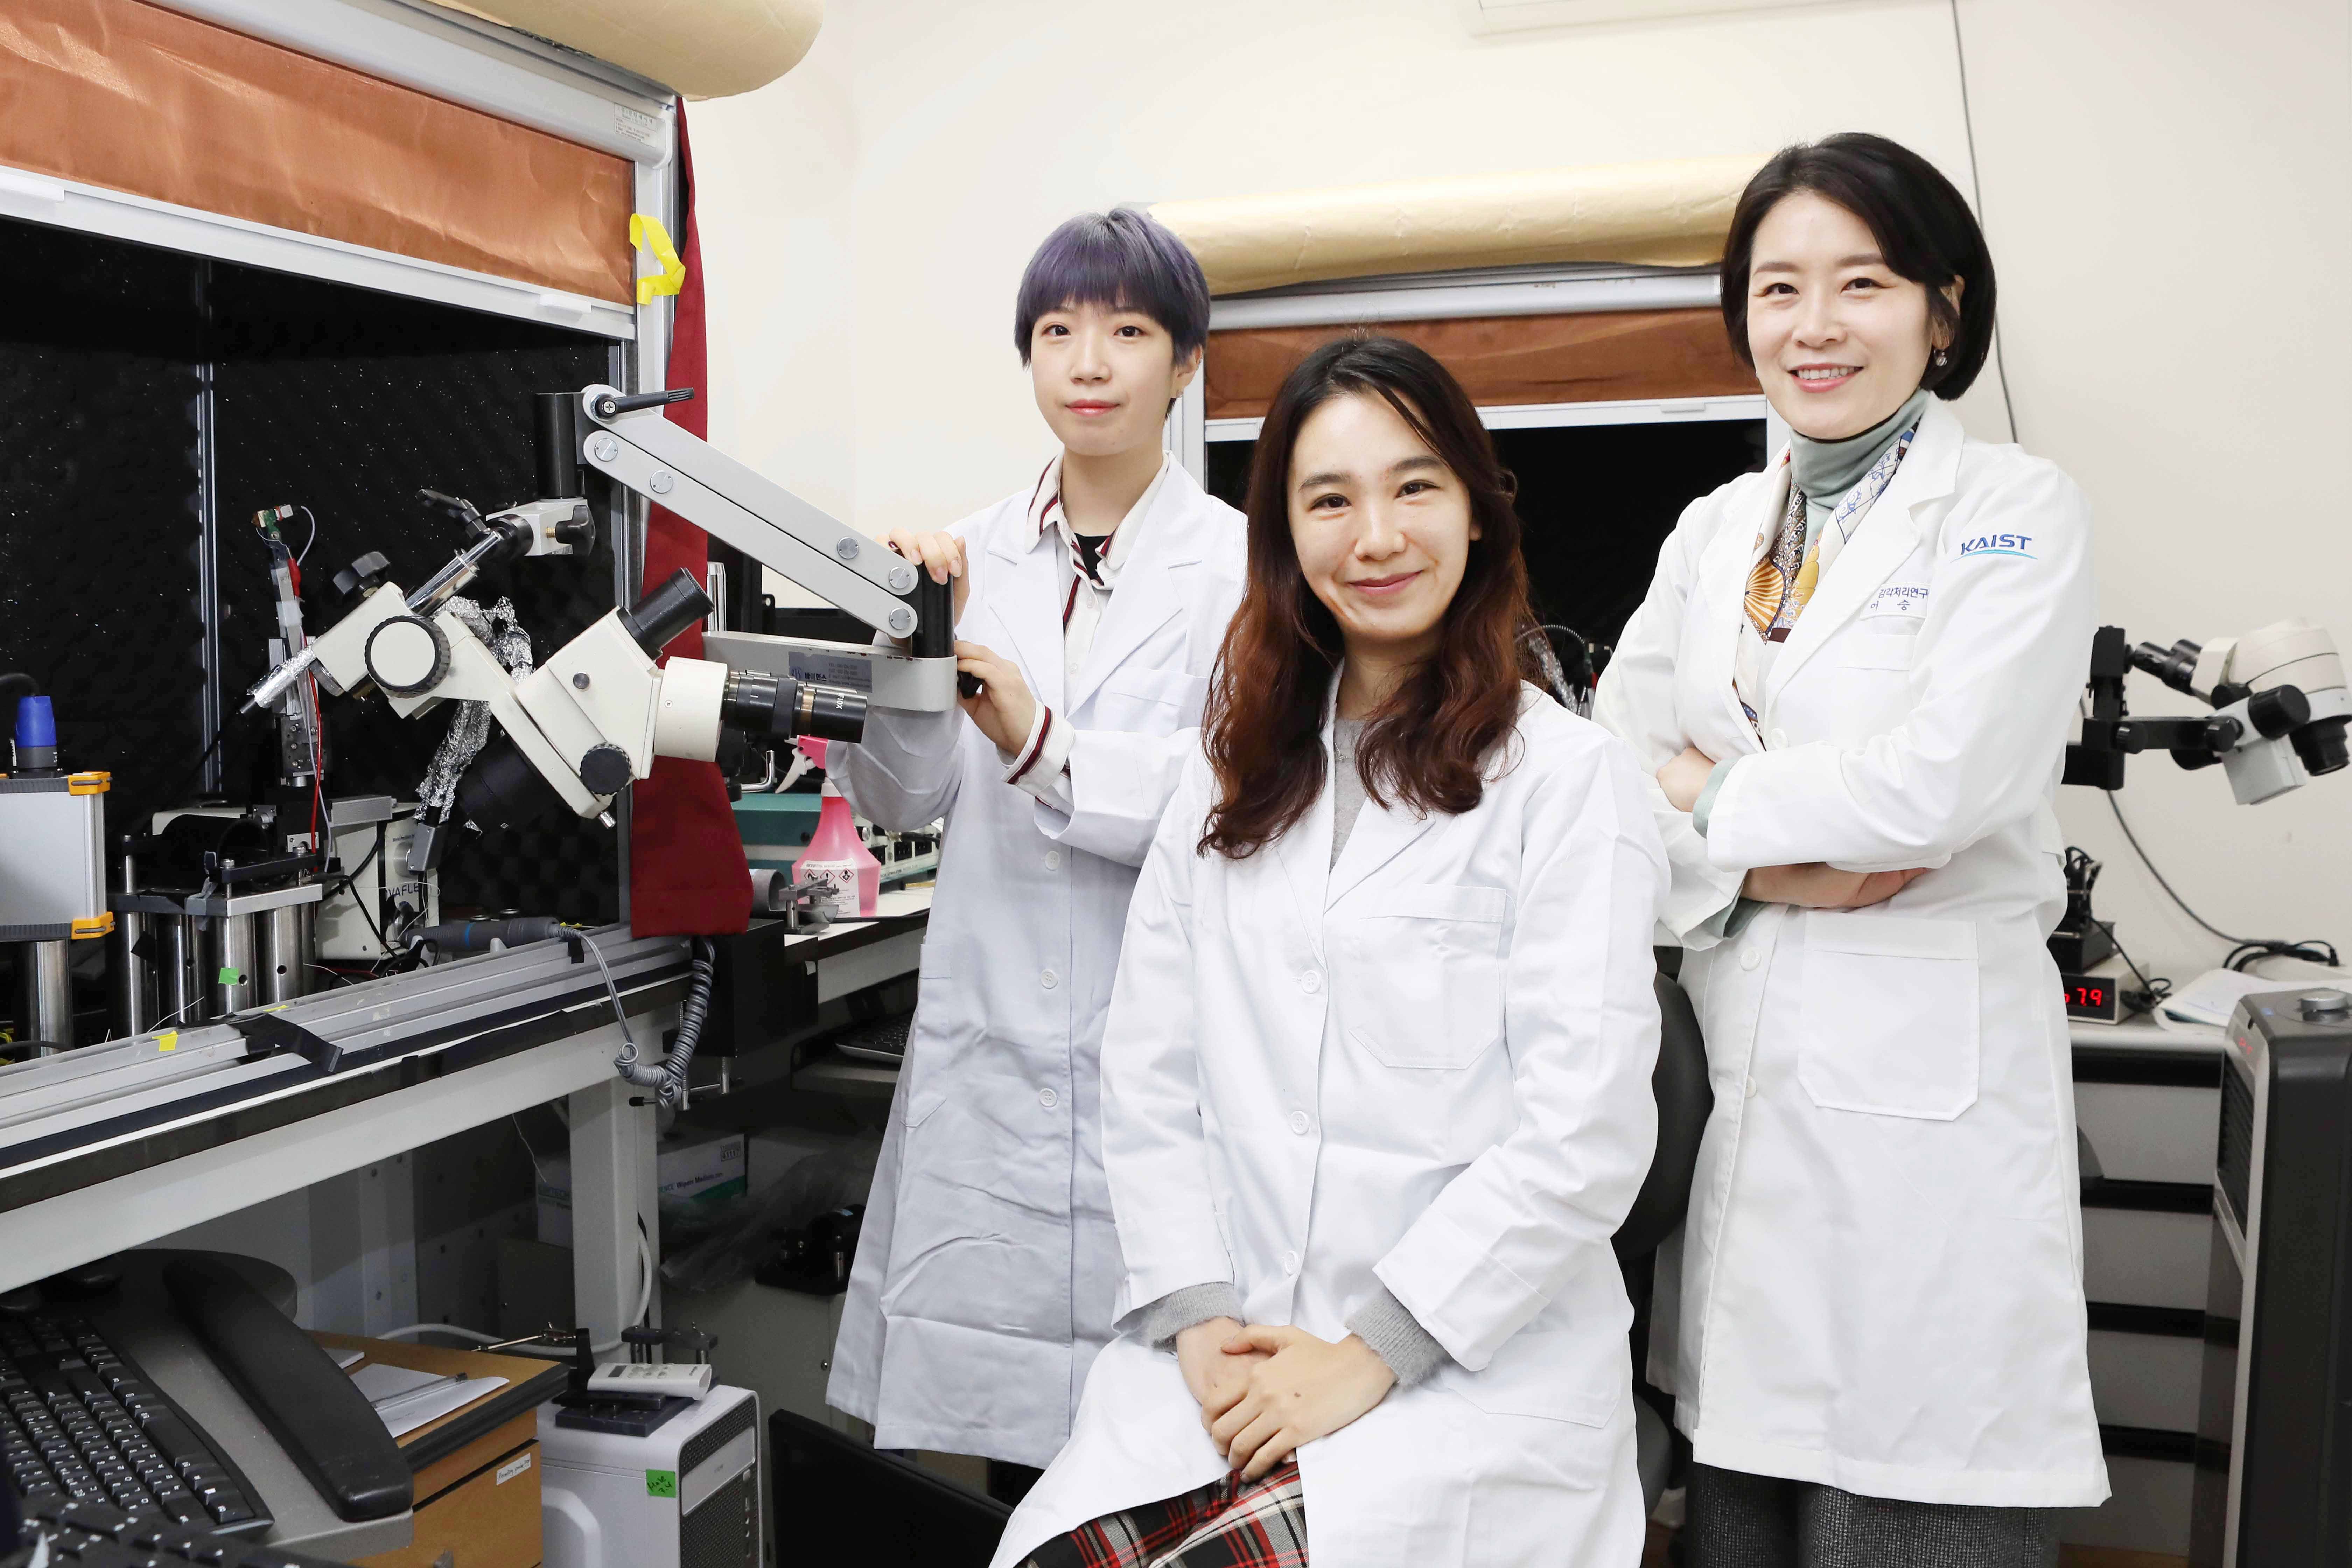 Researcher Yang-Sun Hwang (left), Researcher You-Hyang Song (center), and Professor Seung-Hee Lee (right)